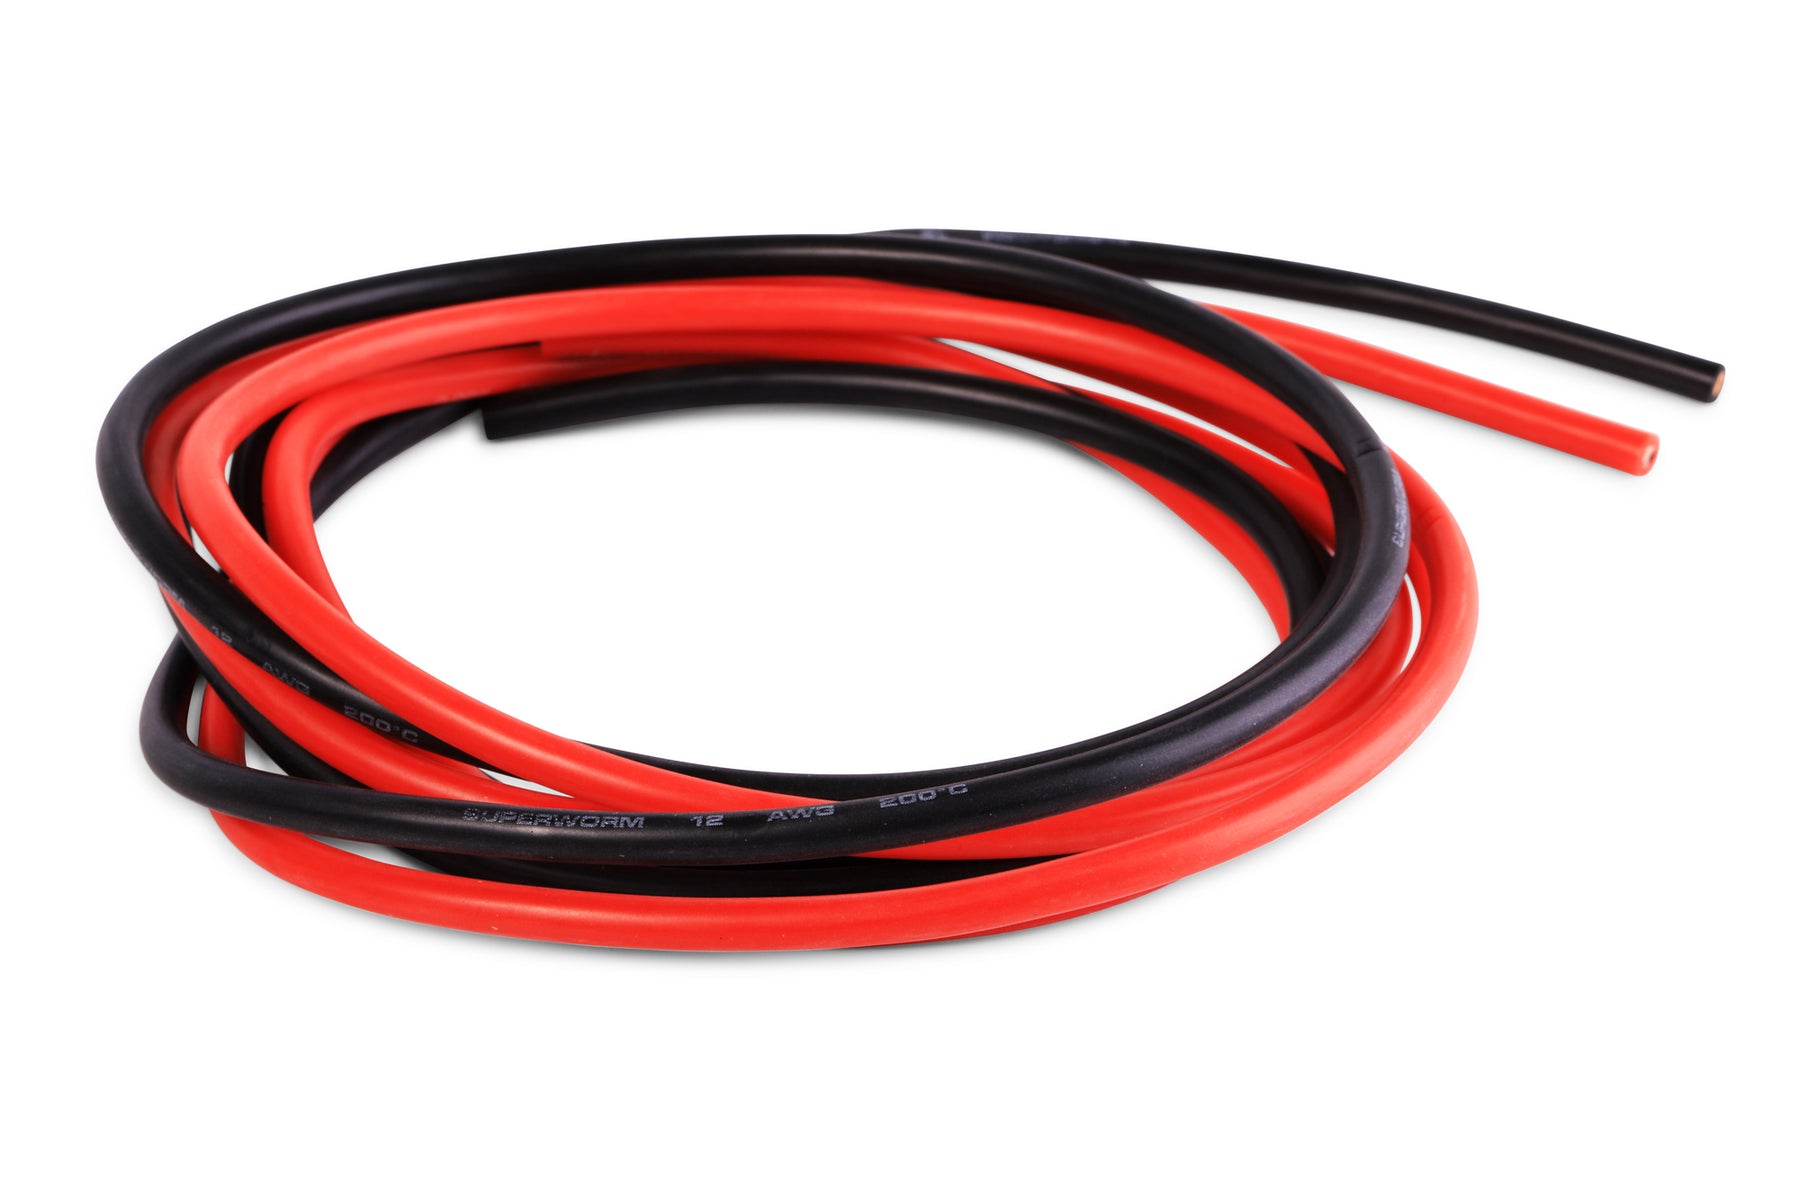 12 AWG Silicone Wire 12 Gauge Wire 20 Feet Flexible Silicone Wire 12AWG  Black Stranded Copper Electric Wire